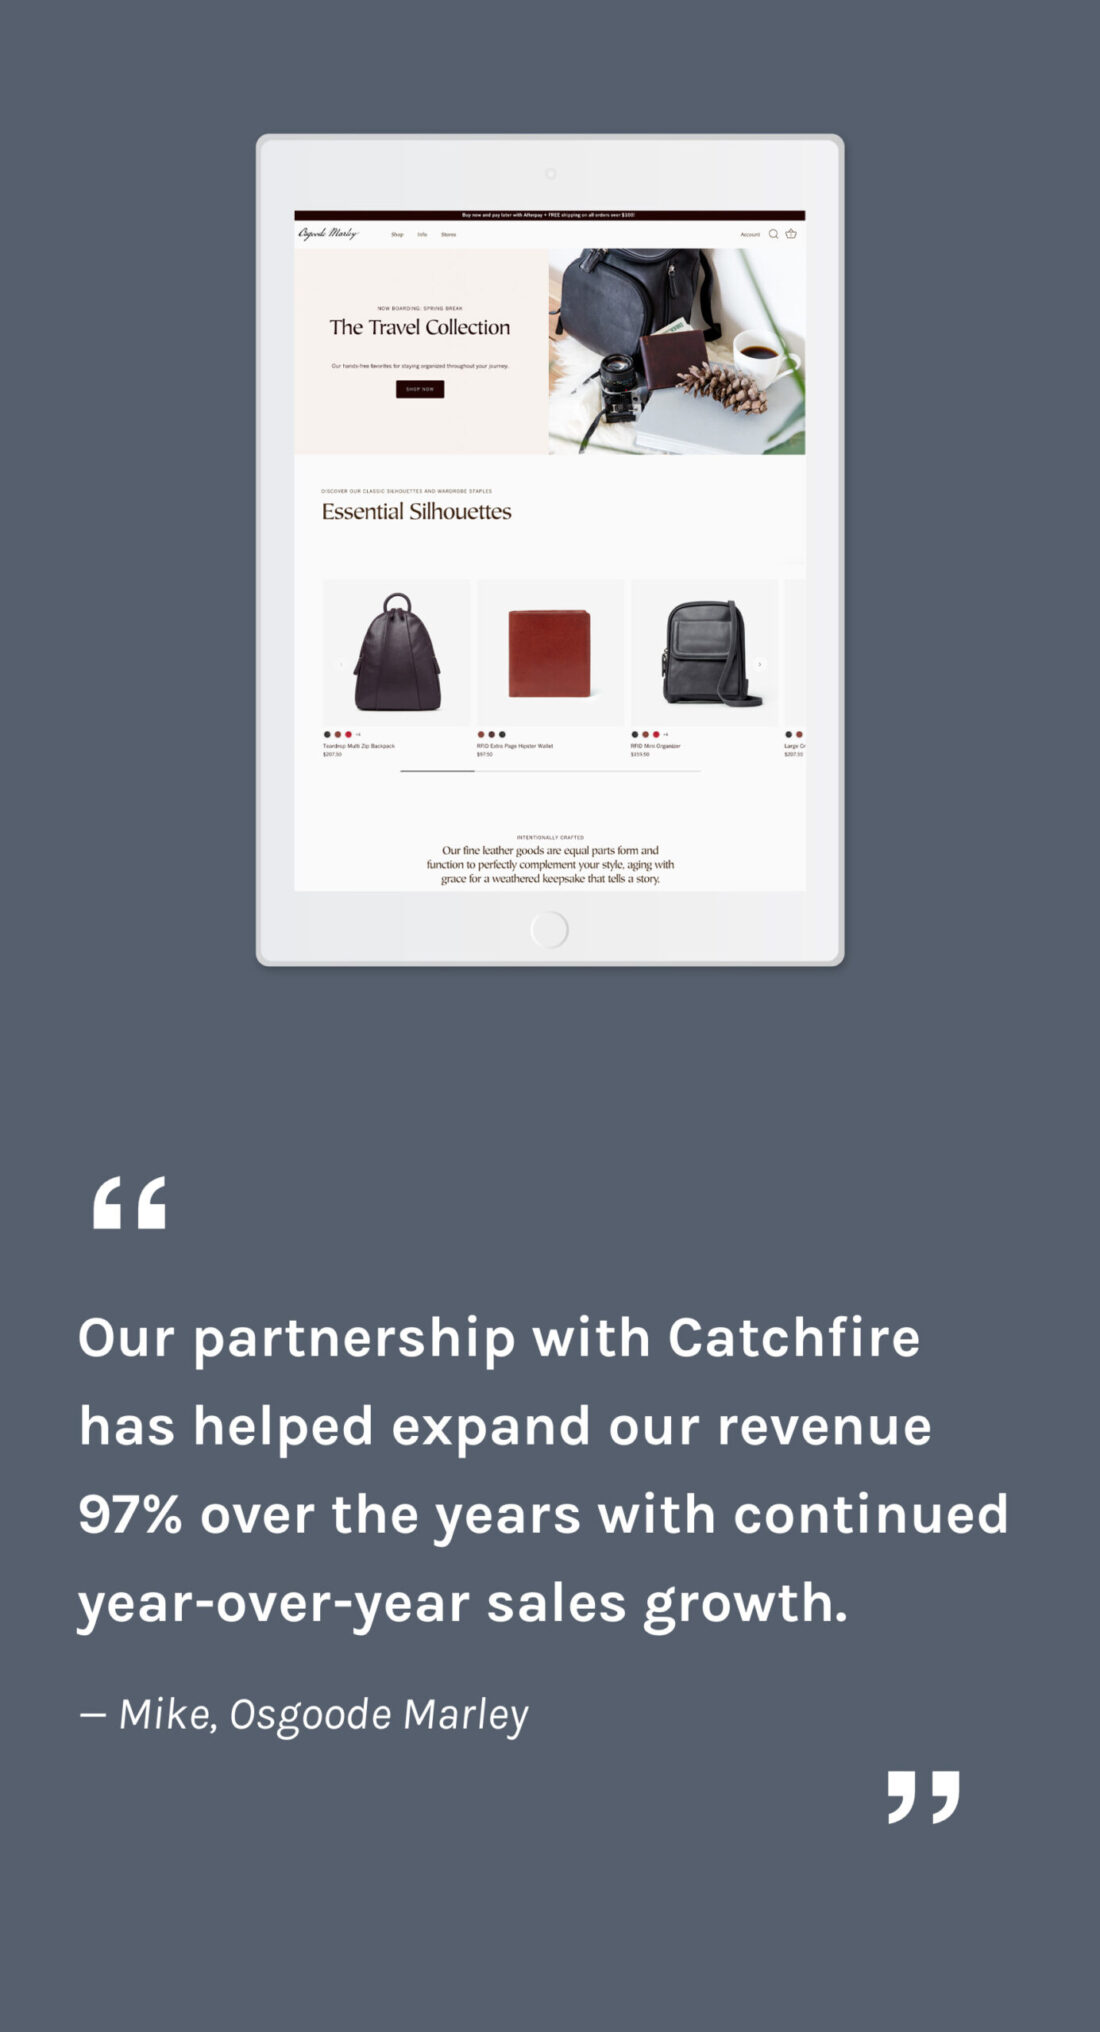 Our partnership with Catchfire has helped expand our revenue 97% over the years with continued year-over-year sales growth. — Mike, Osgoode Marley